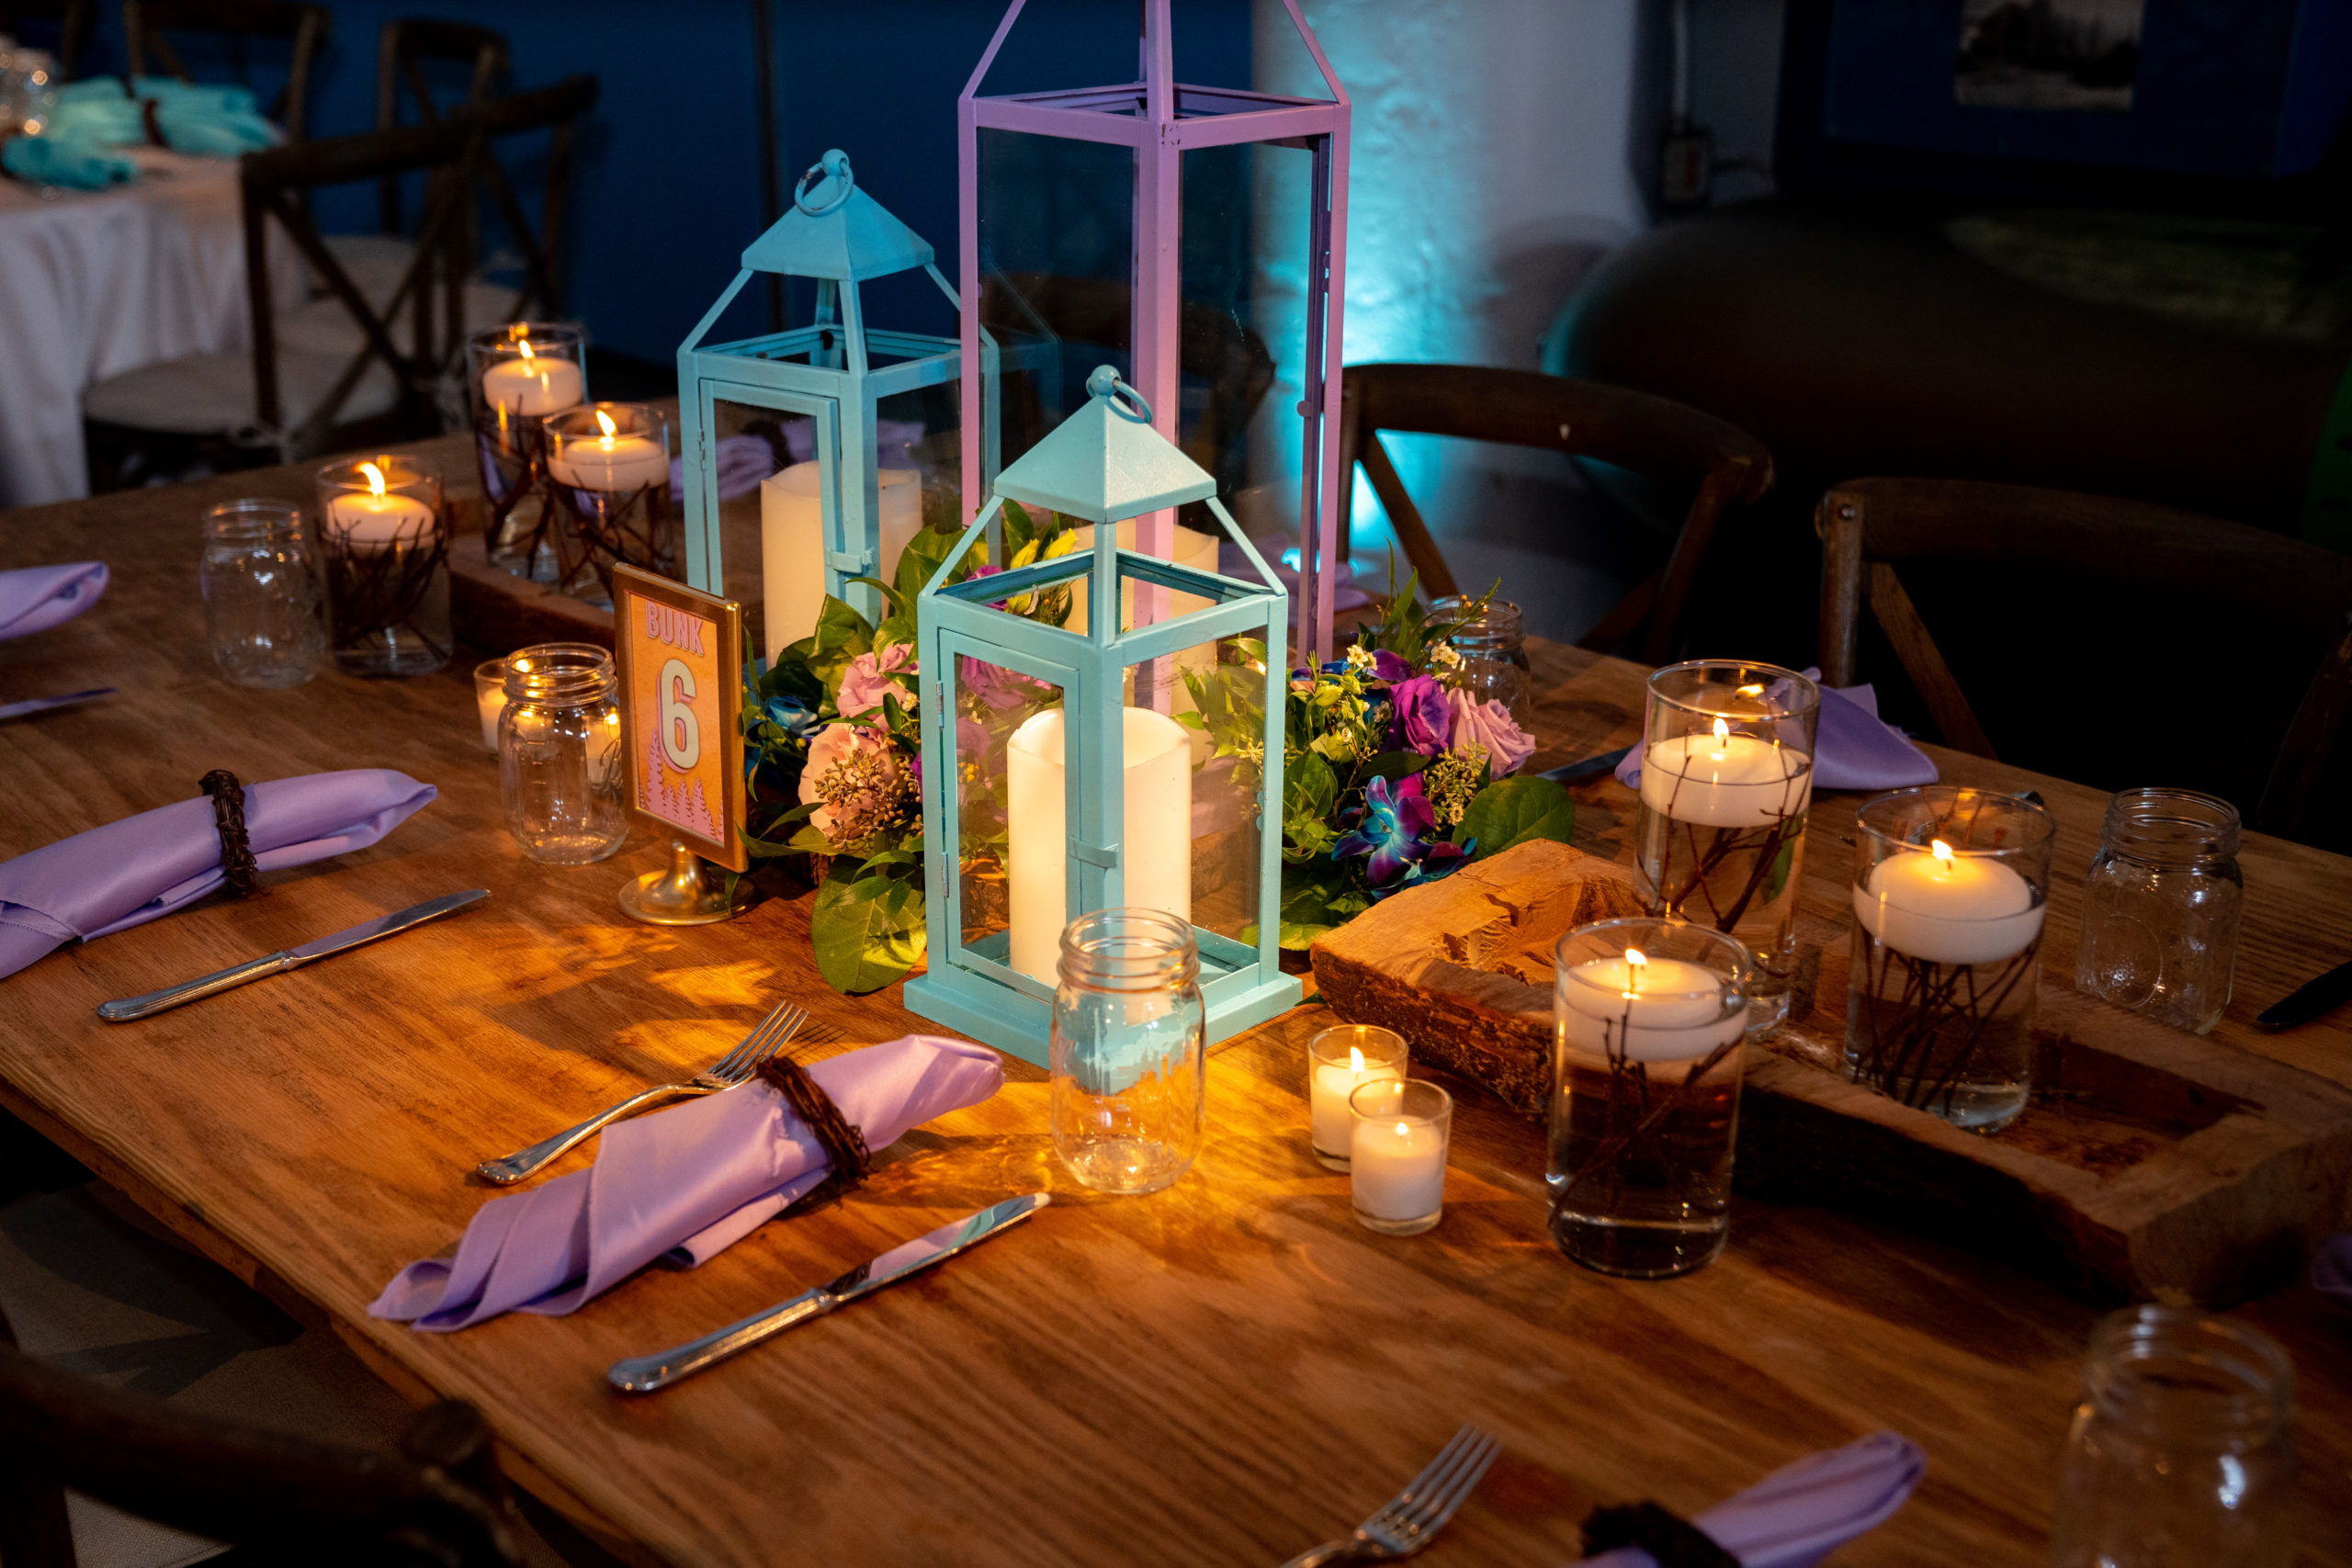 Centerpieces and tables at Sydney’s Rustic Summer Camp themed Bat Mitzvah party at the Torpedo Factory, Alexandria, VA | Pop Color Events | Adding a Pop of Color to Bar & Bat Mitzvahs in DC, MD & VA | Photo by: Michael Temchine Photography